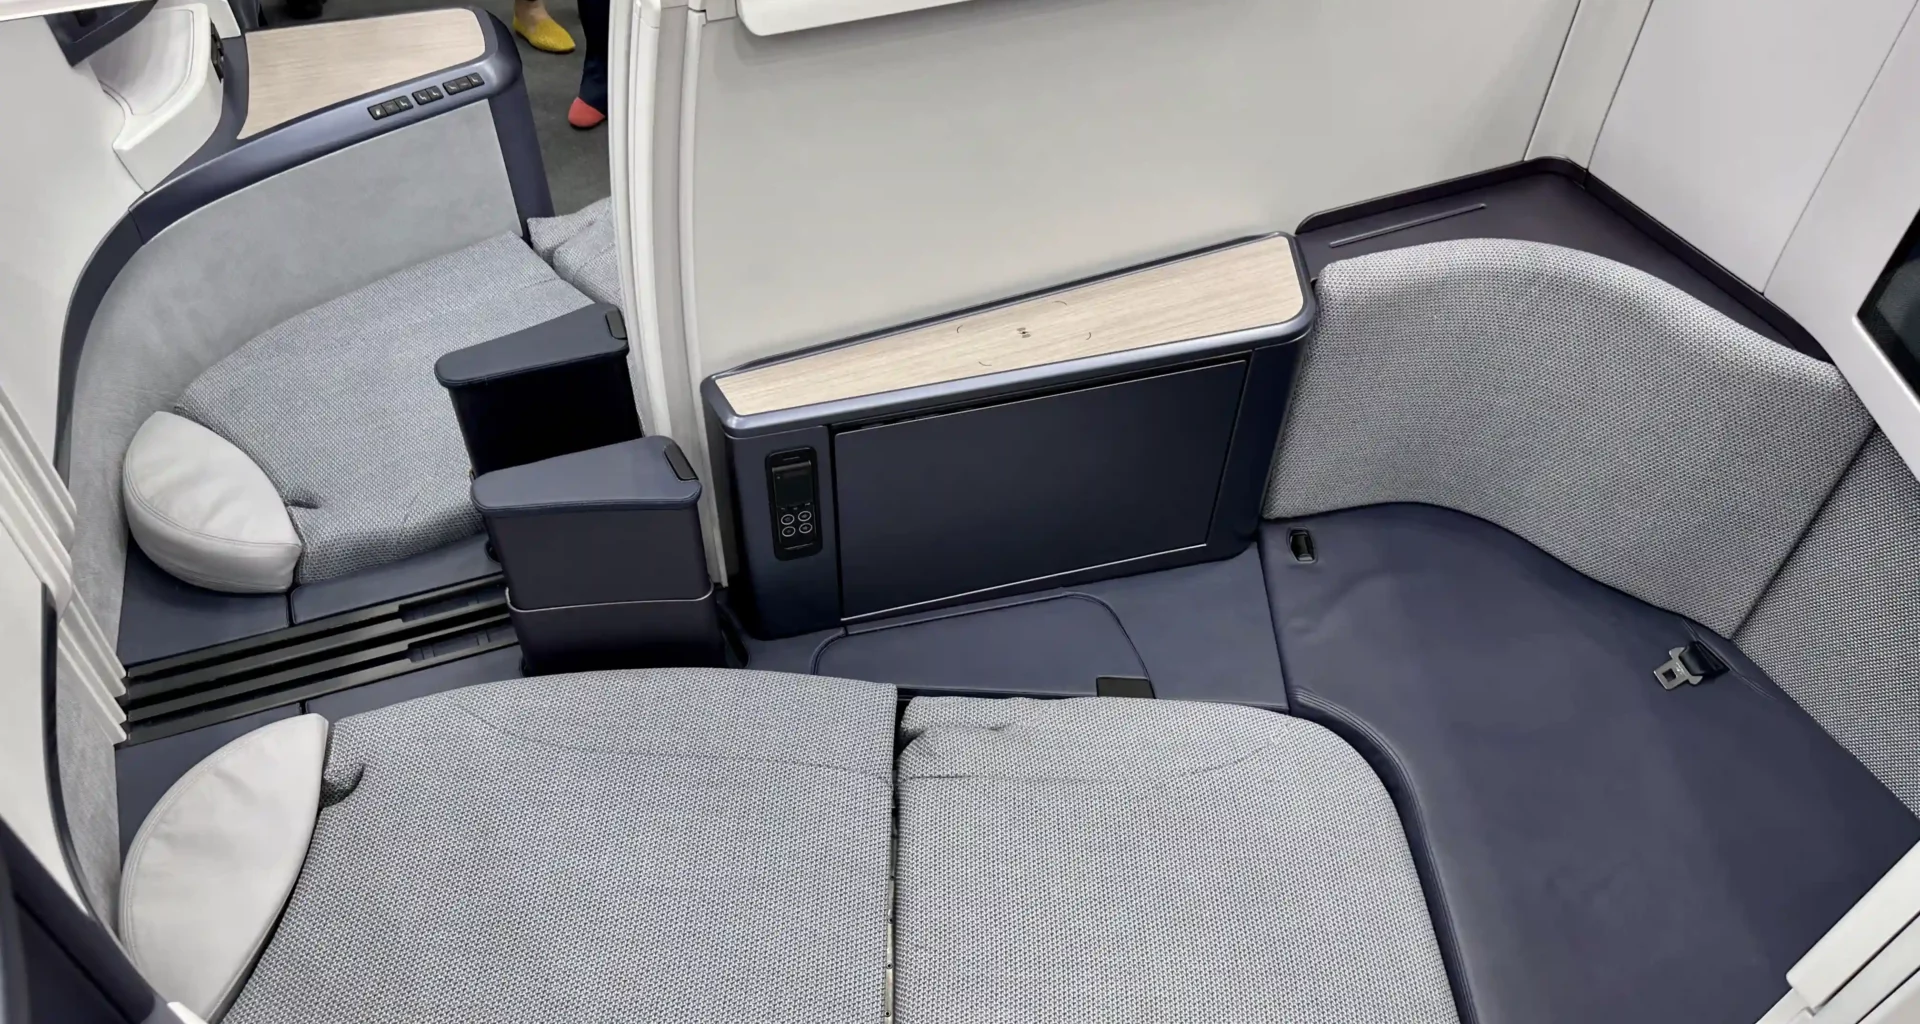 Air New Zealand Premiere Luxe seat in lie flat mode